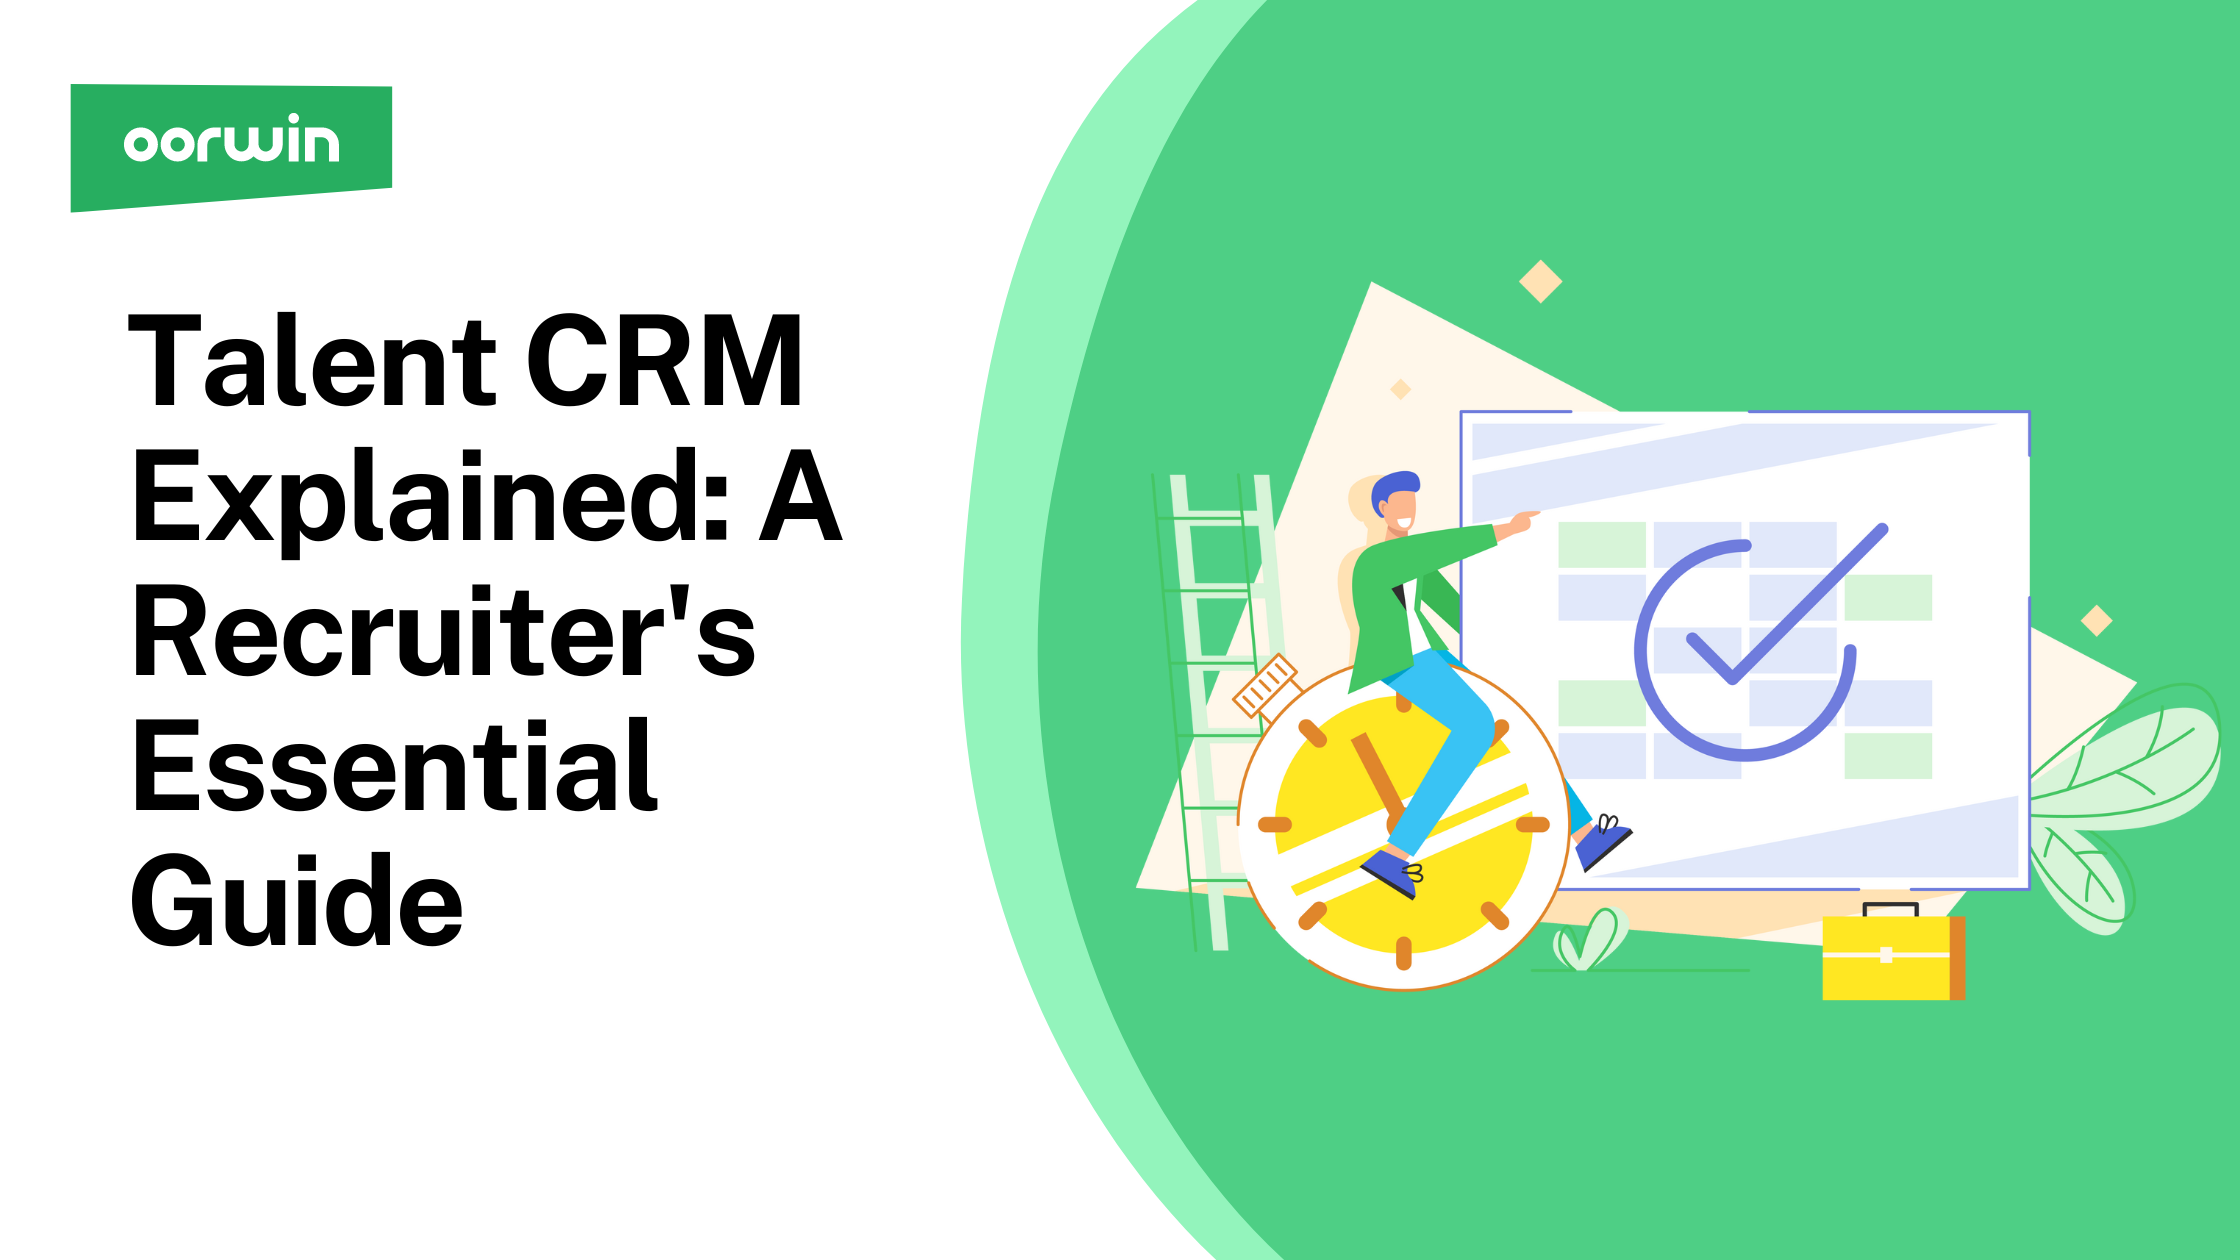 Talent CRM Explained: A Recruiter’s Essential Guide